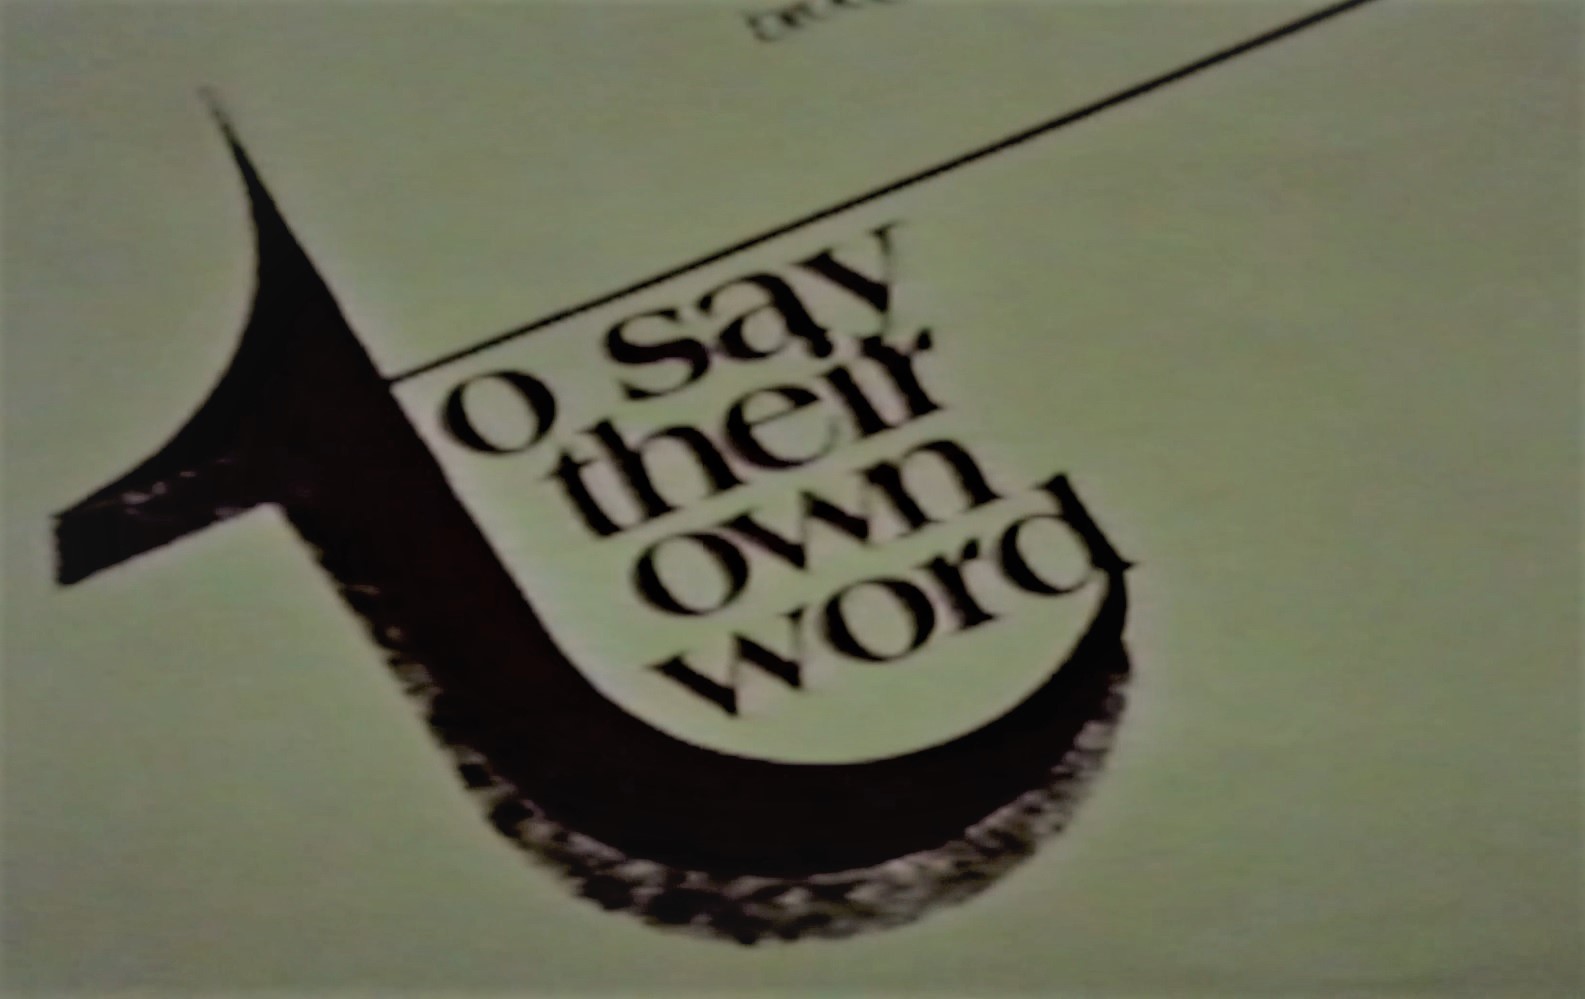 To say their own word cover